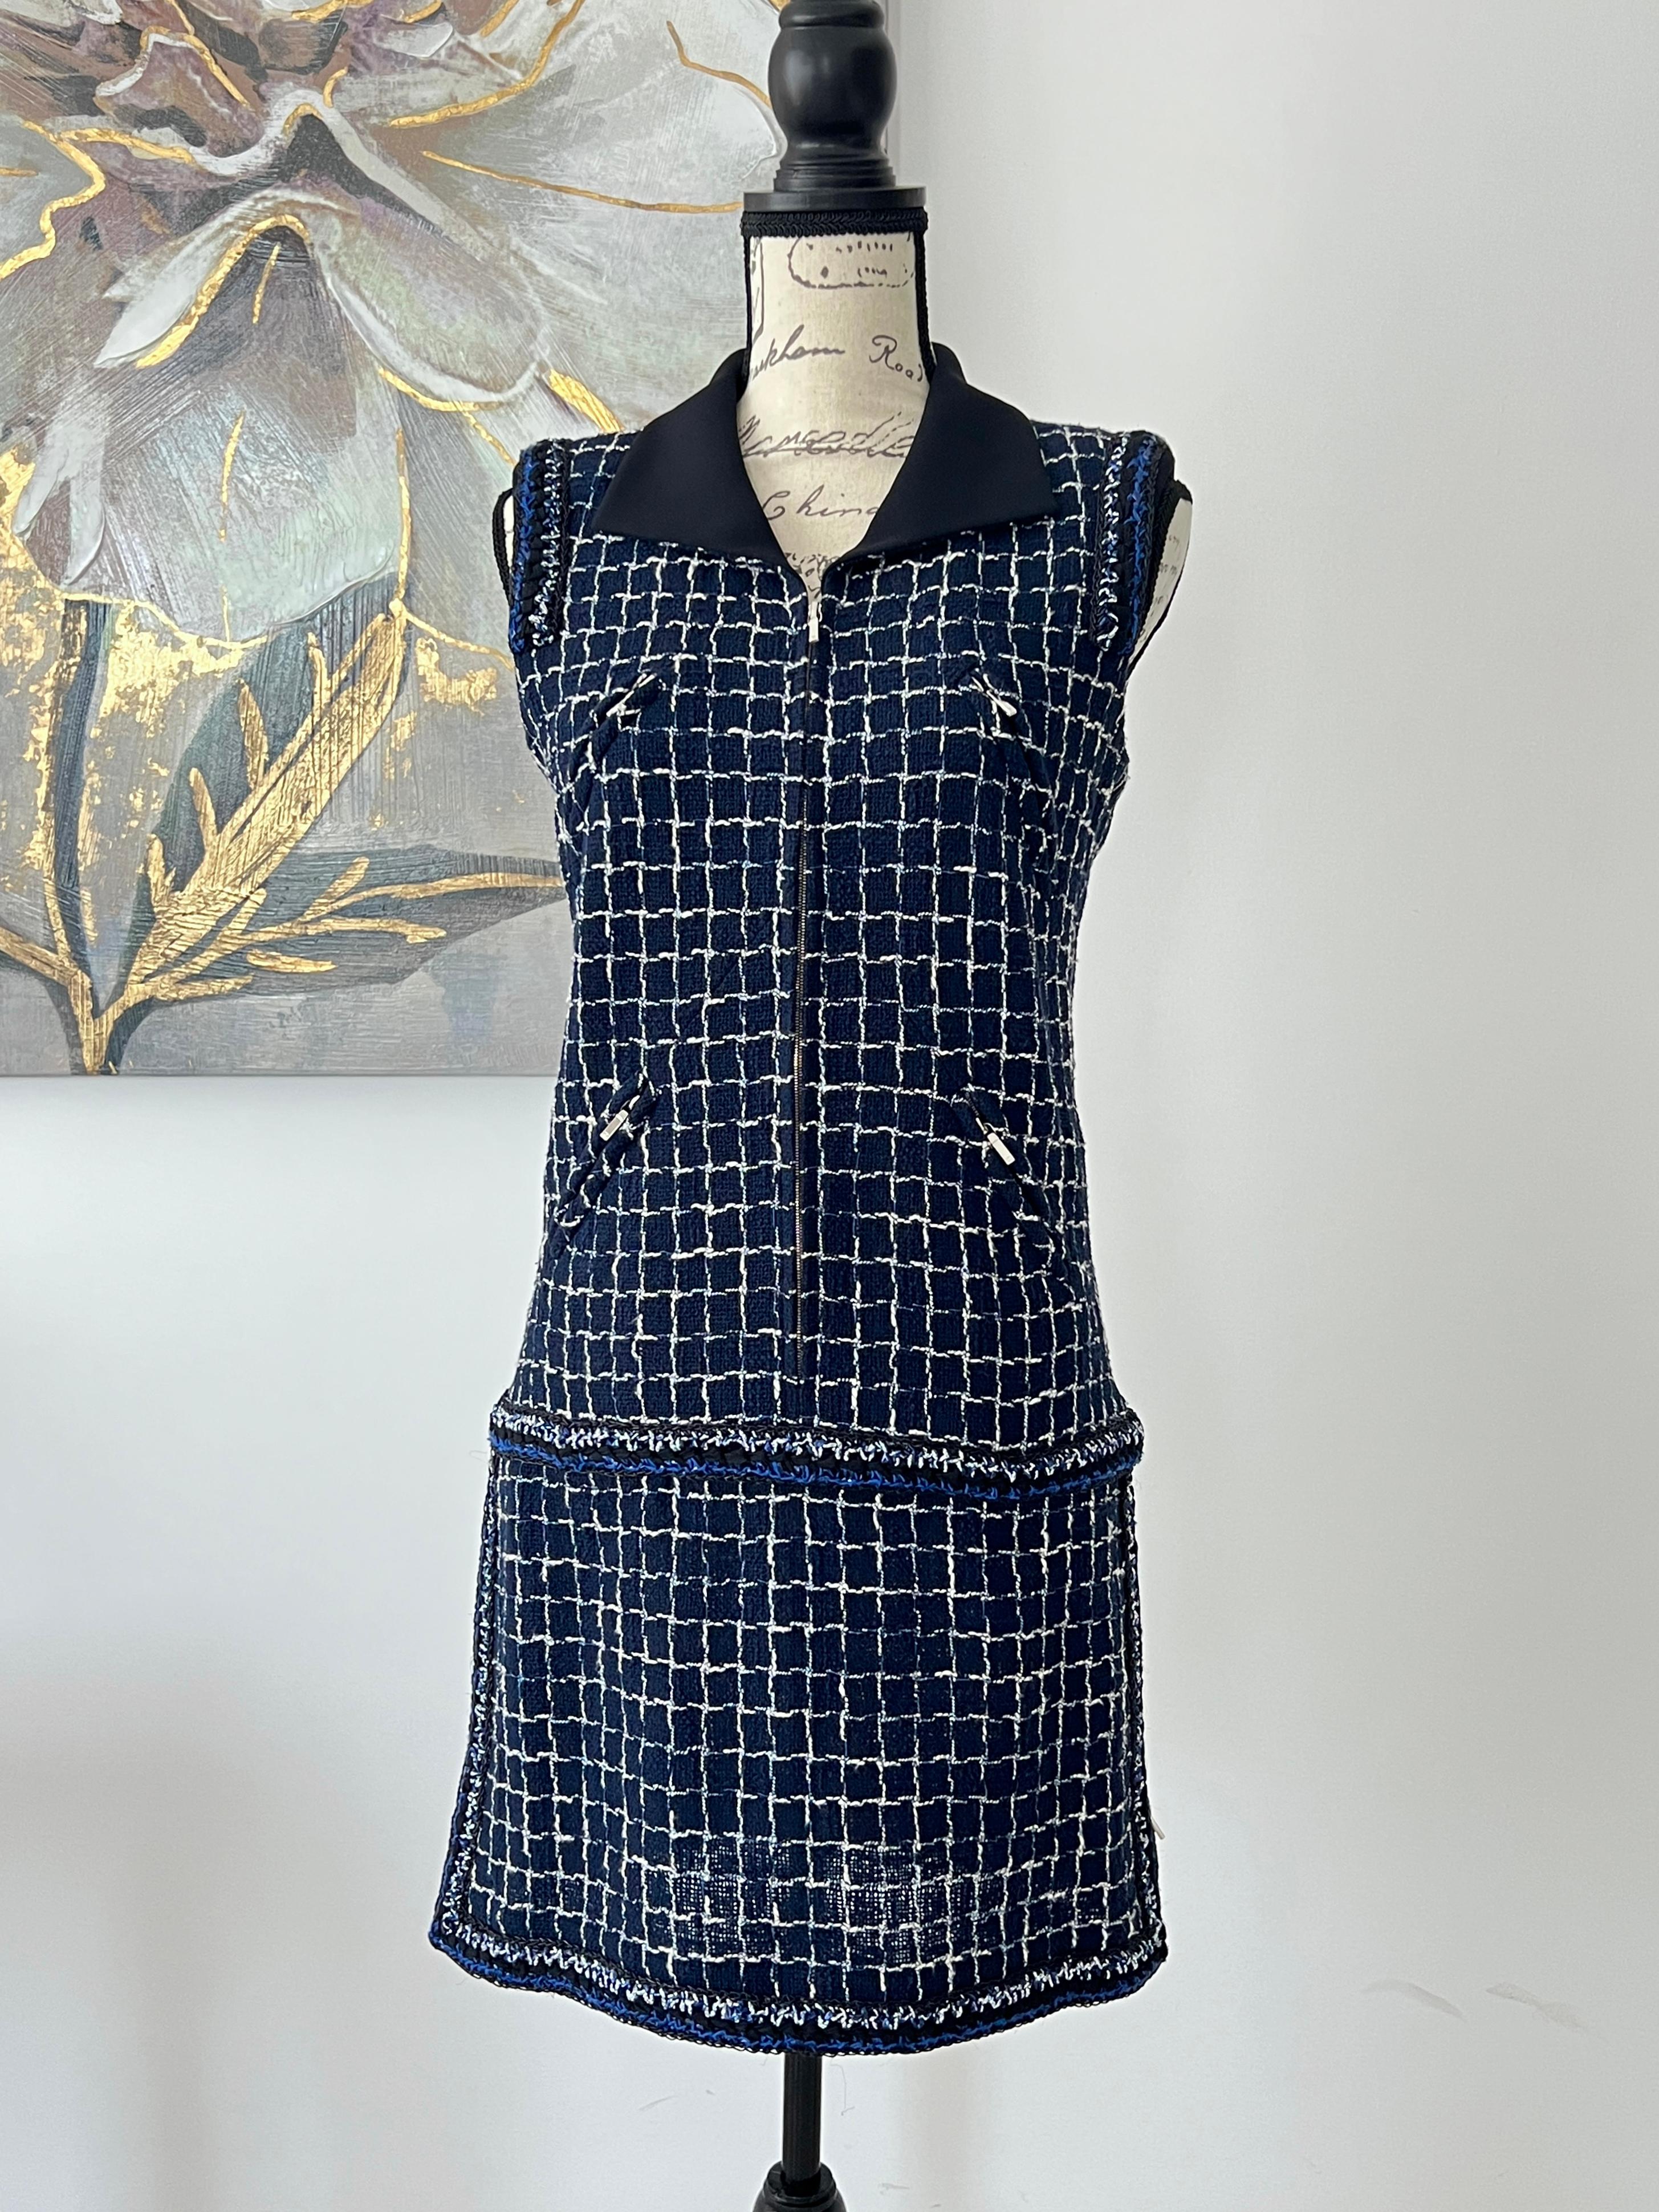 Chanel Graffiti Collection Tweed Dress In New Condition For Sale In Dubai, AE